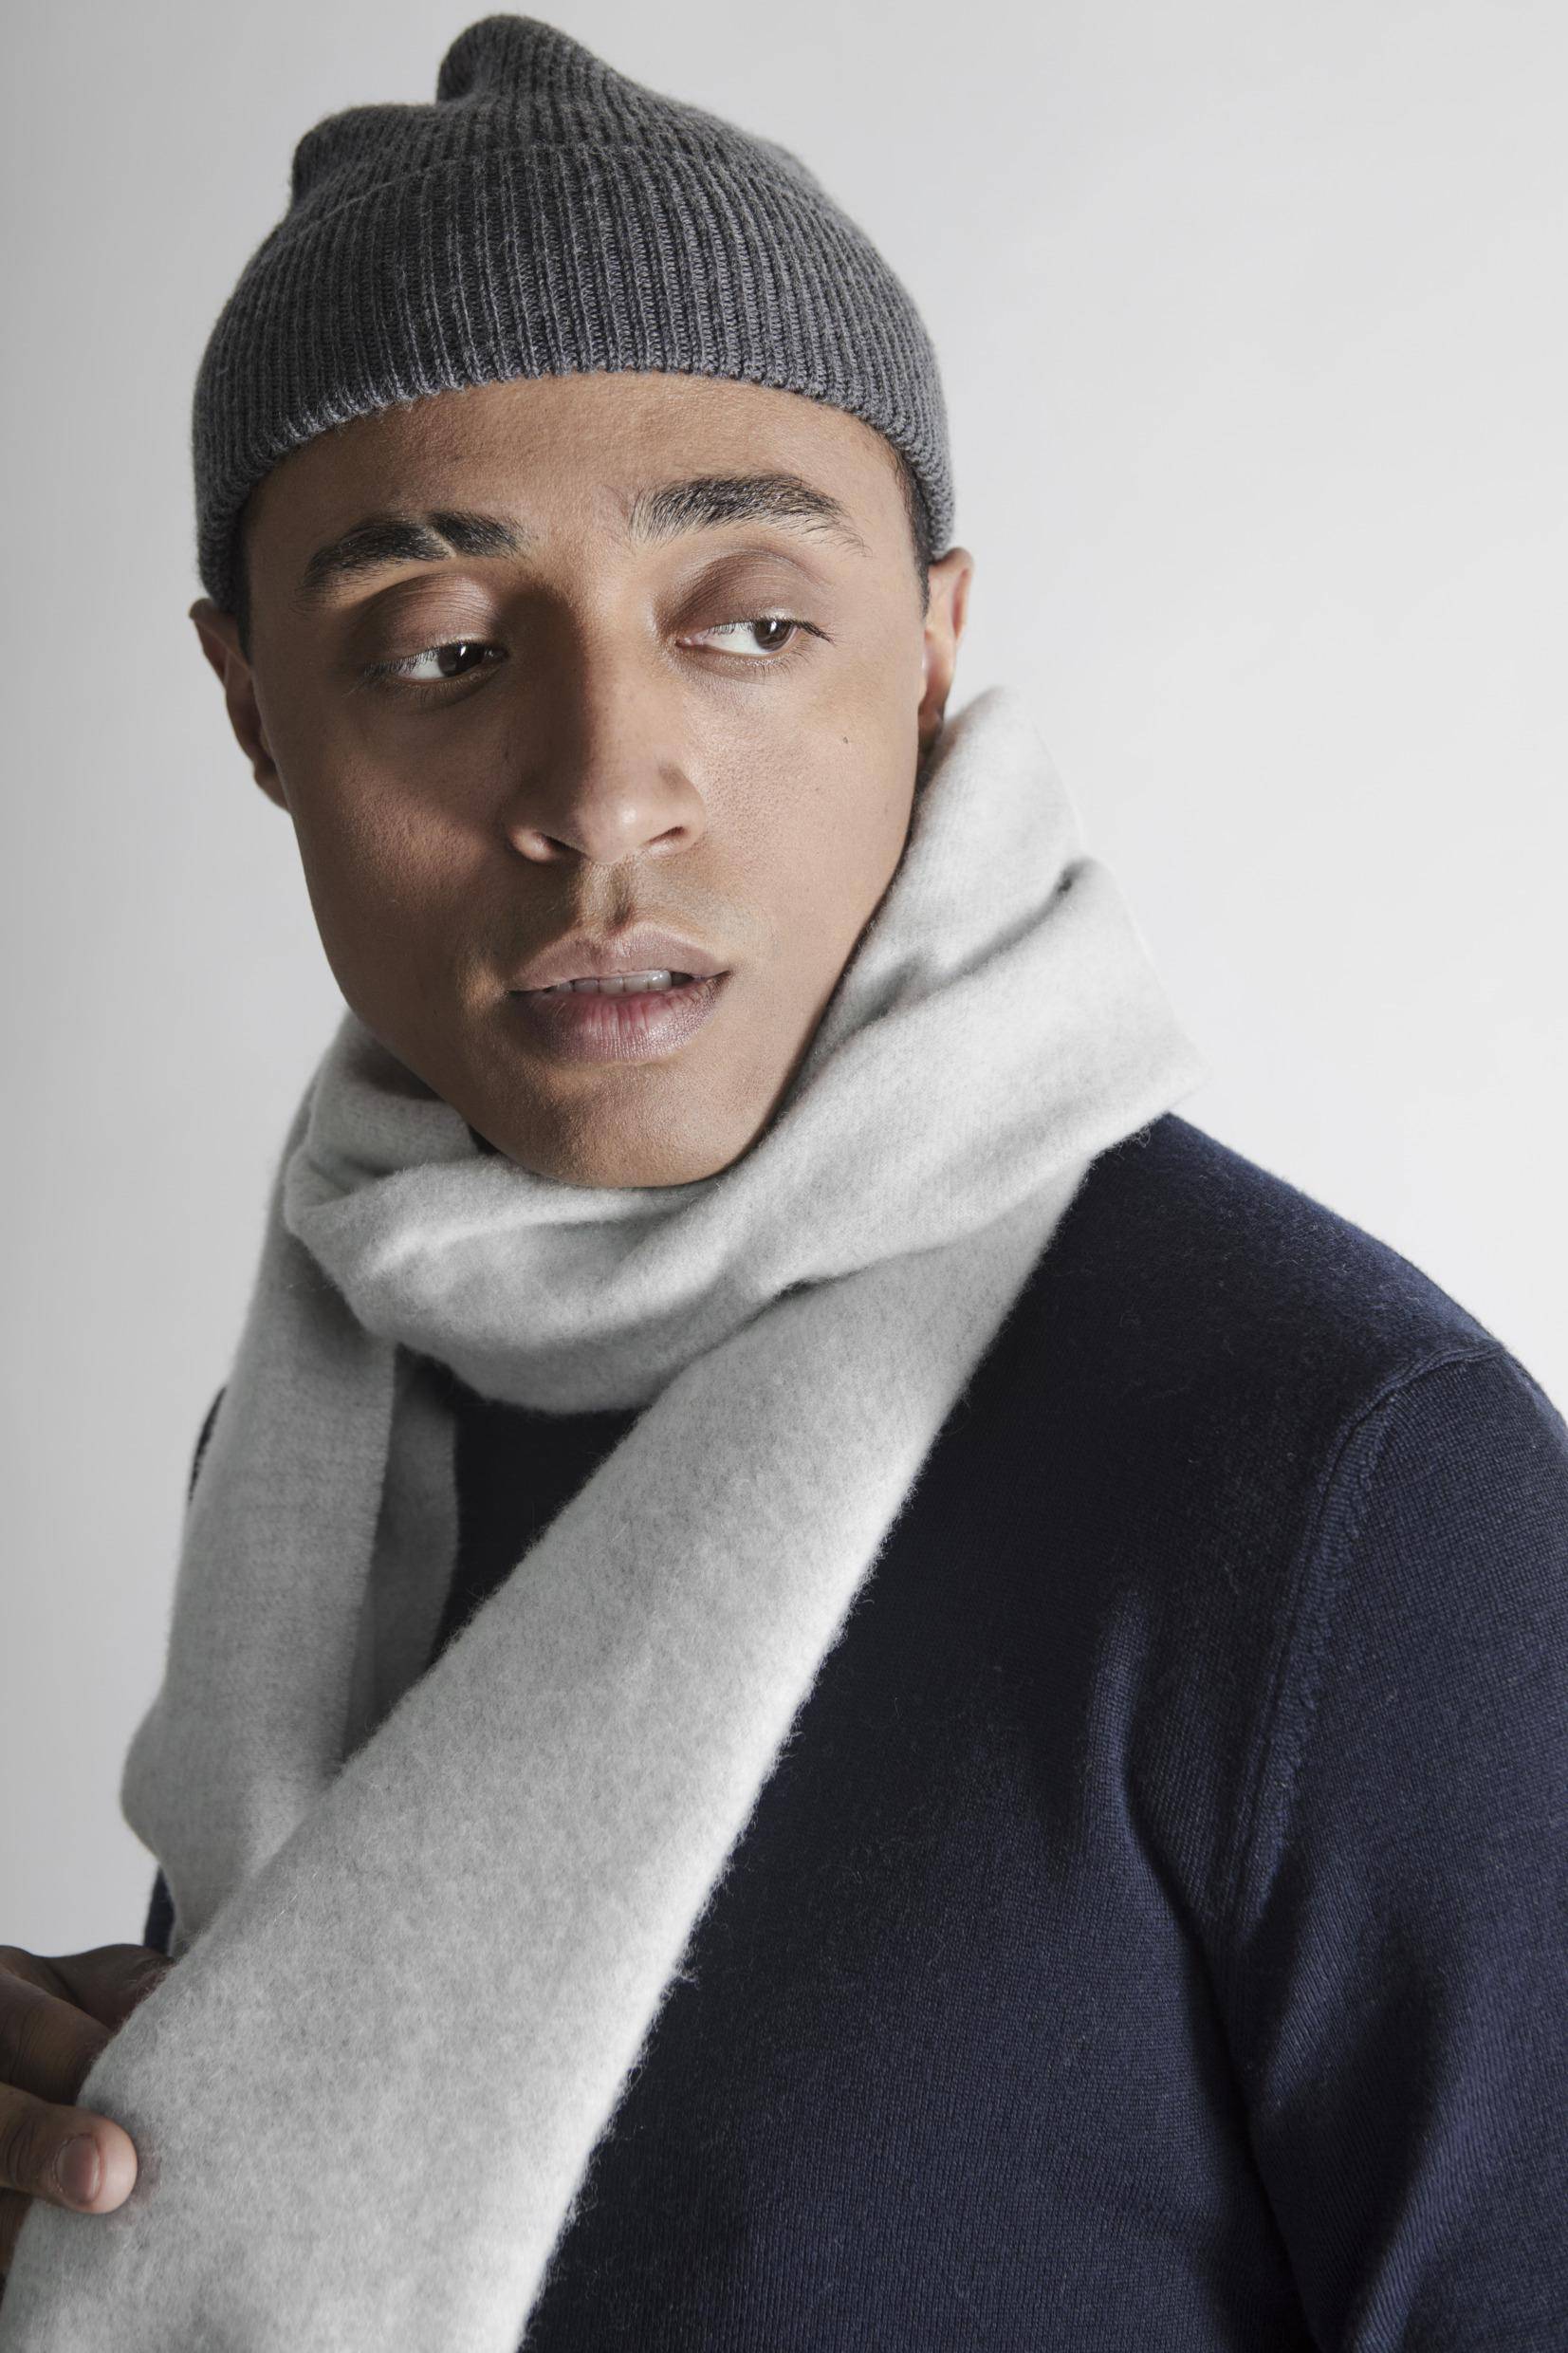 A portrait of man with a beanie and scarf.